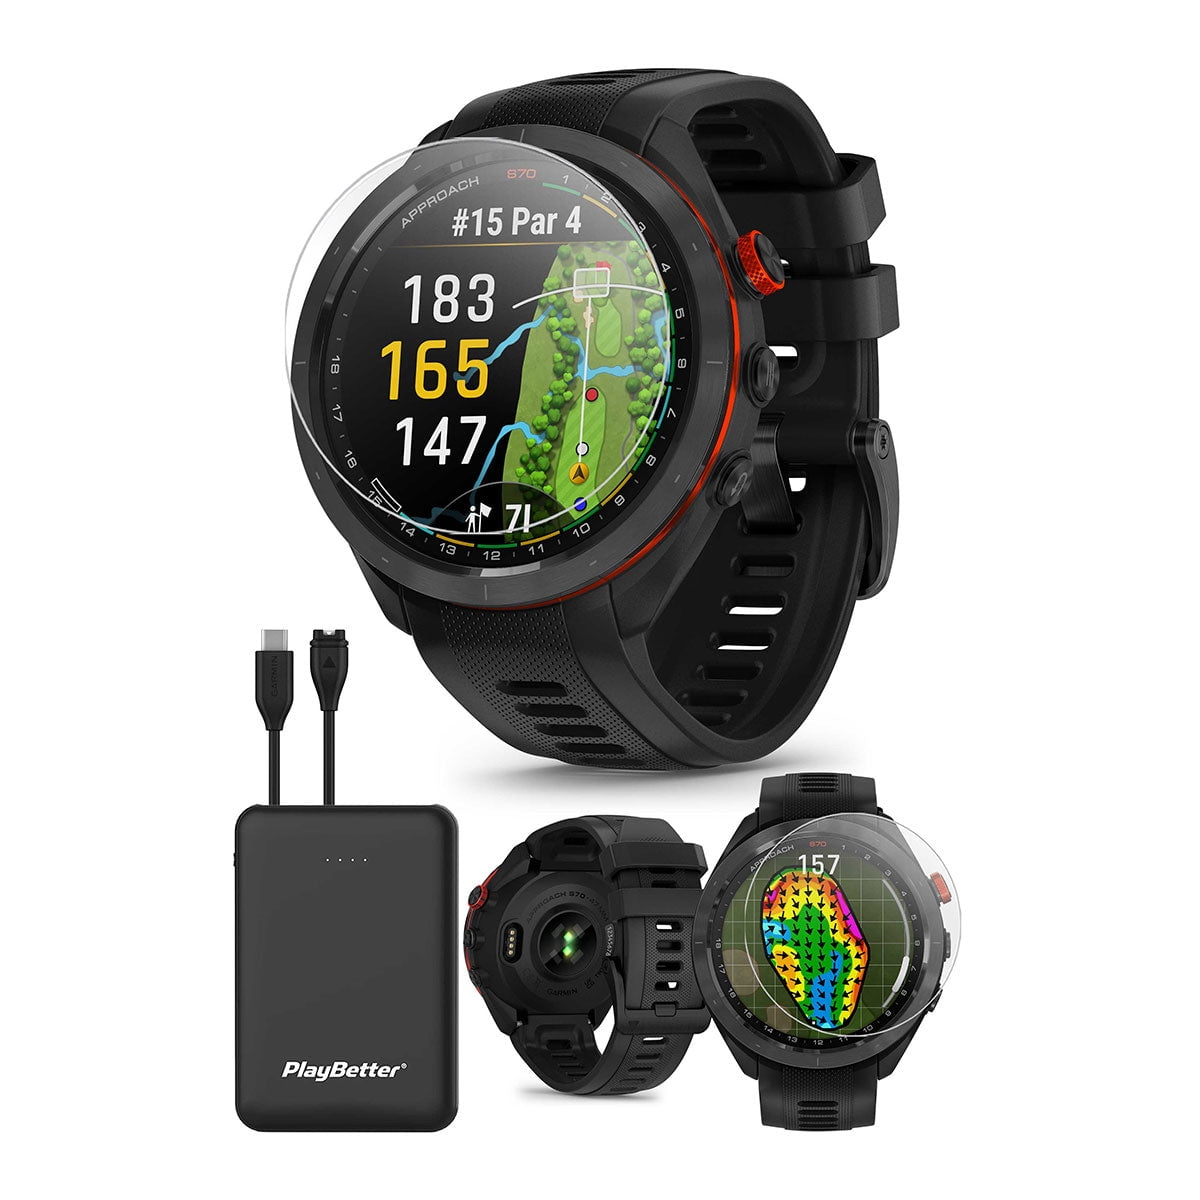 Garmin Approach S70 (Black, 47mm) Golf GPS Watch Bundle with PlayBetter  Screen Protectors & Portable Charger